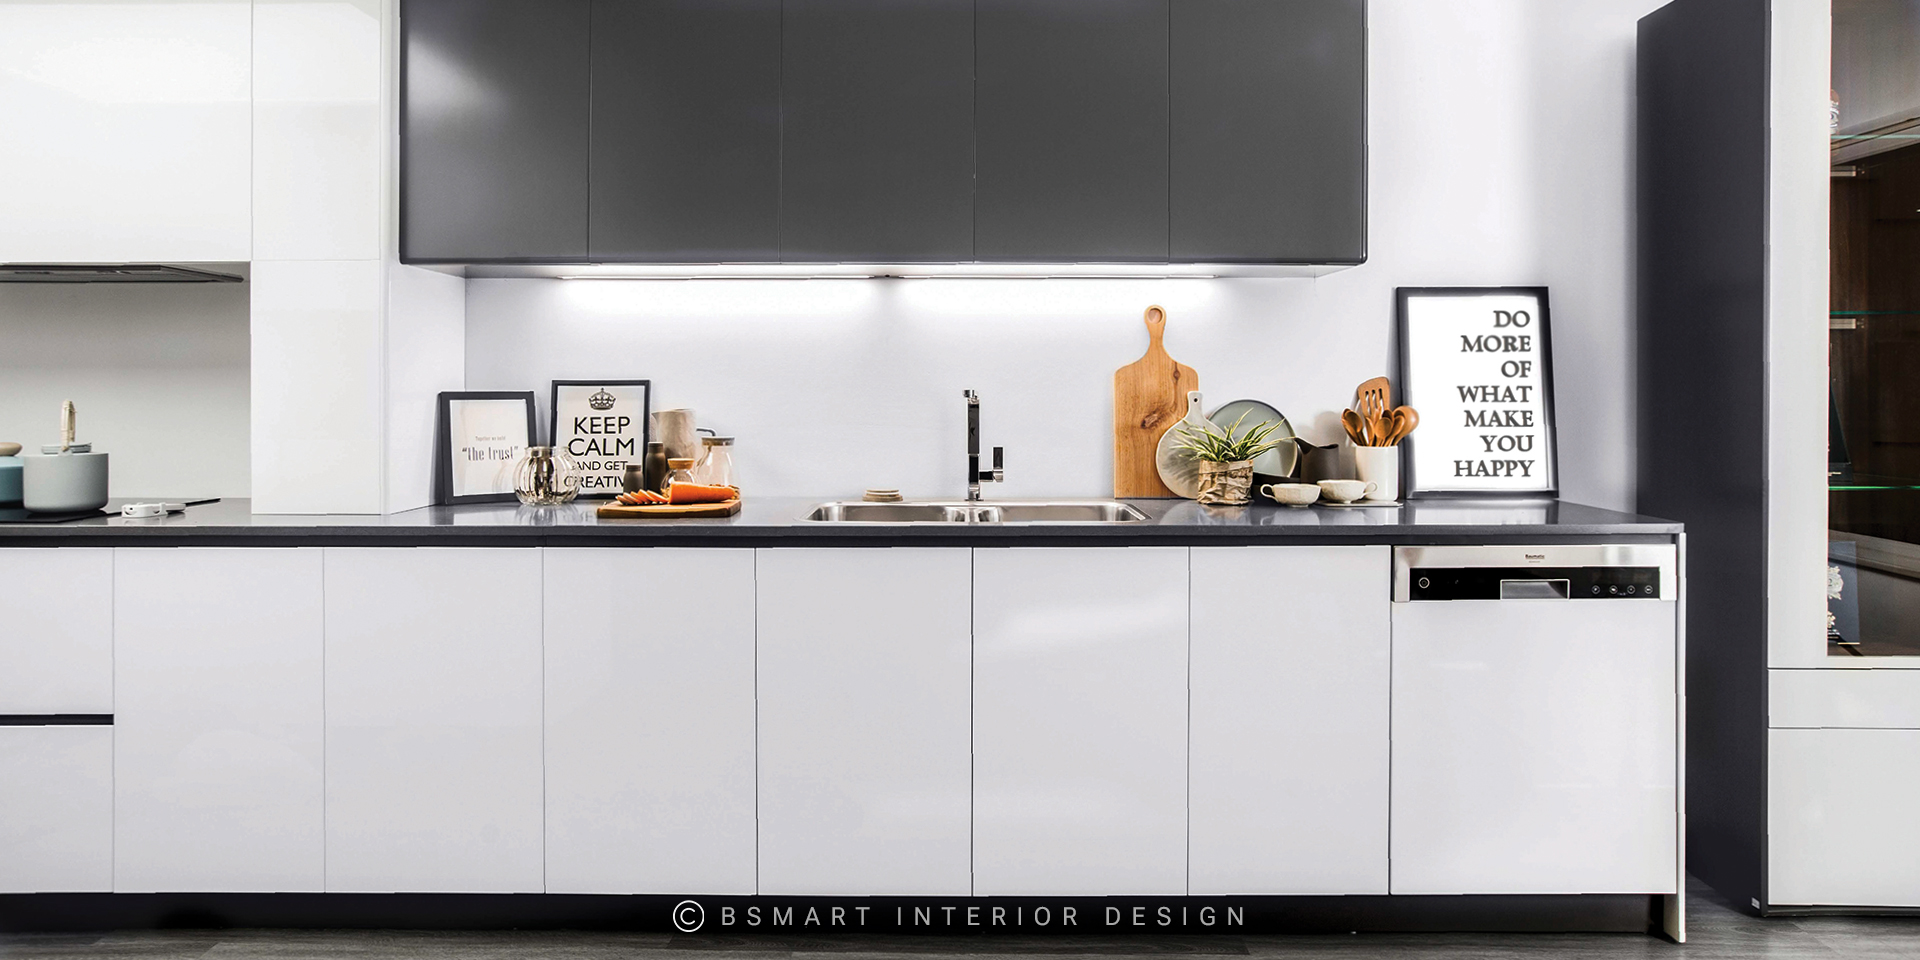 Bsmart’s Neo Fit kitchen cabinets where the personality of the homeowner is expressed